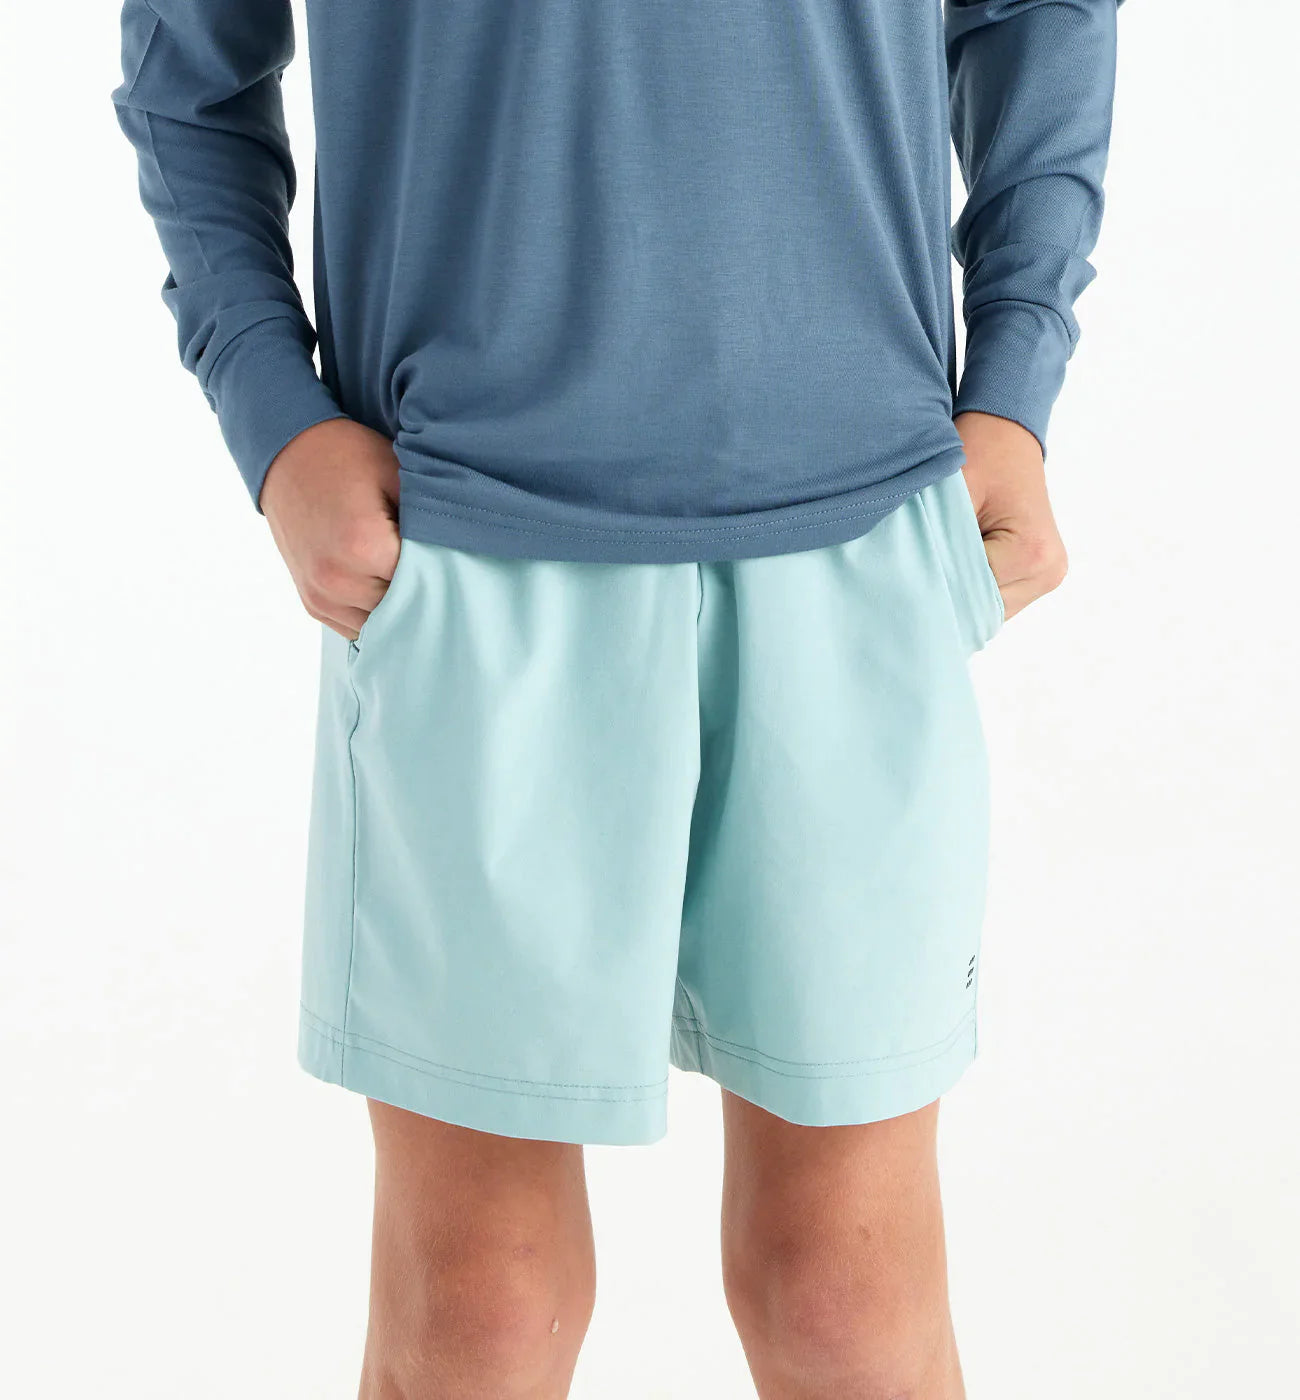 Free Fly-Youth Breeze Short, Multiple Colors